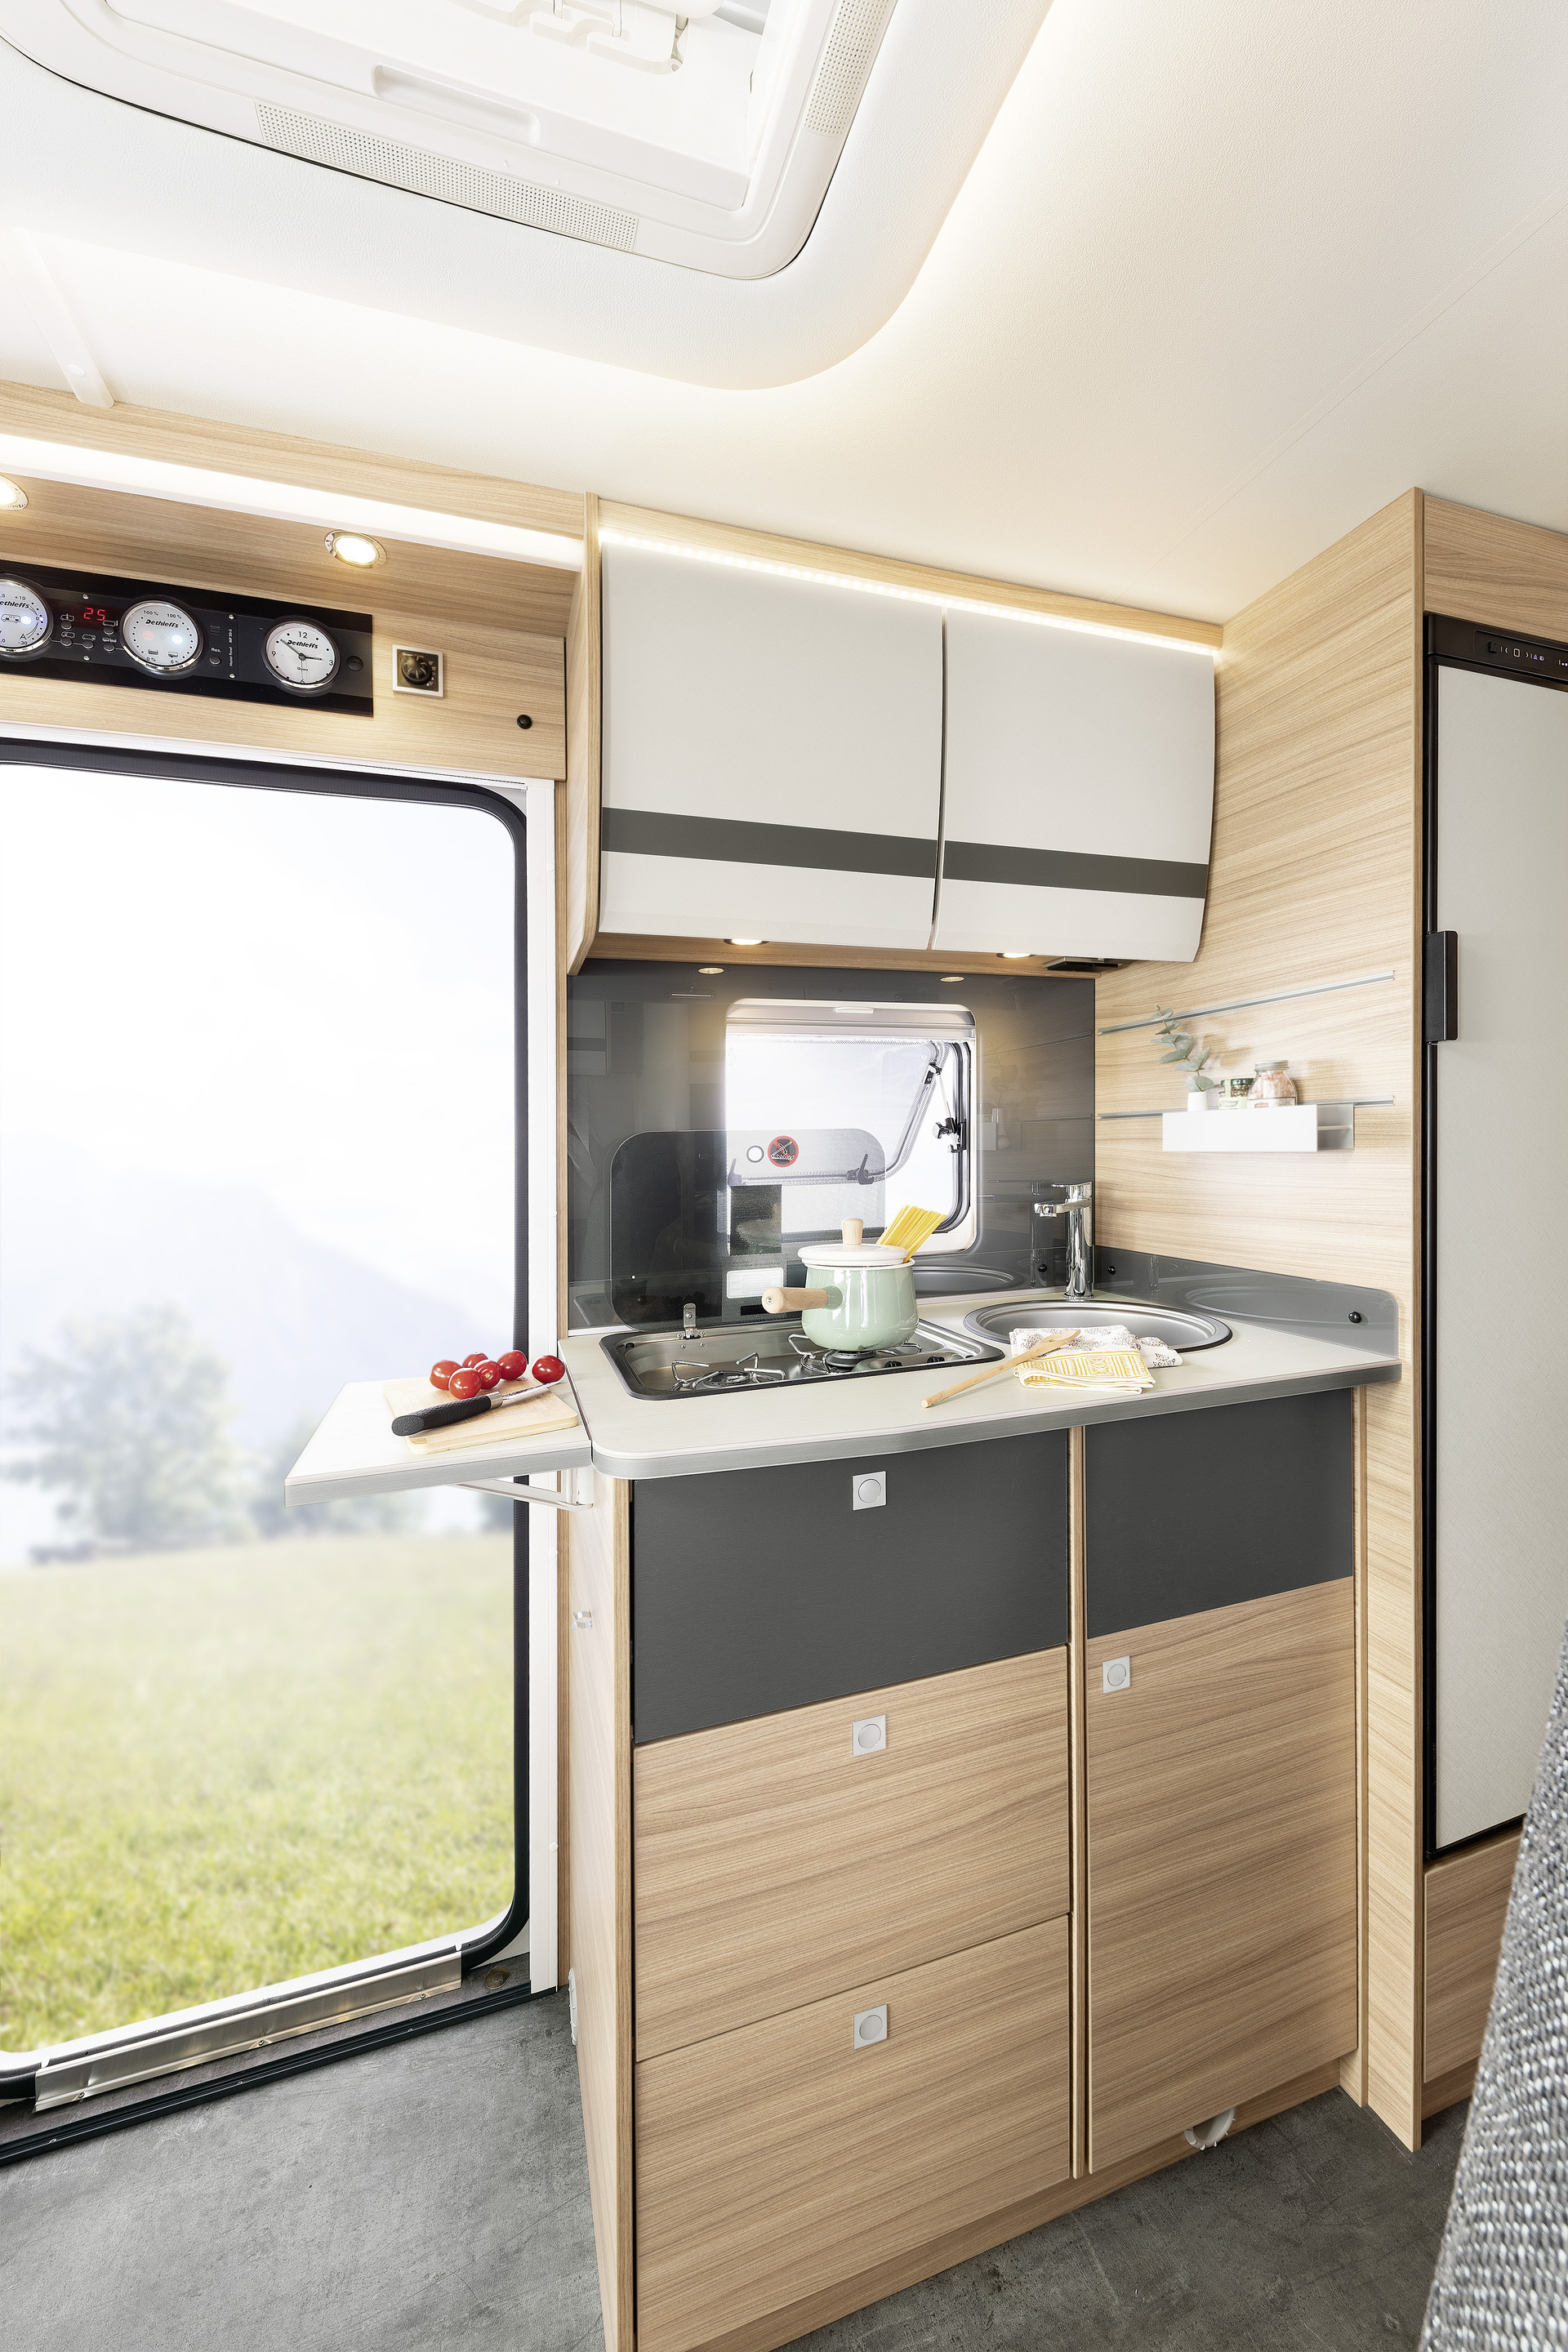 Compact, yet packed everything you need – fully equipped kitchen with hot-water system, gas cooker, large drawers and fridge • I 6